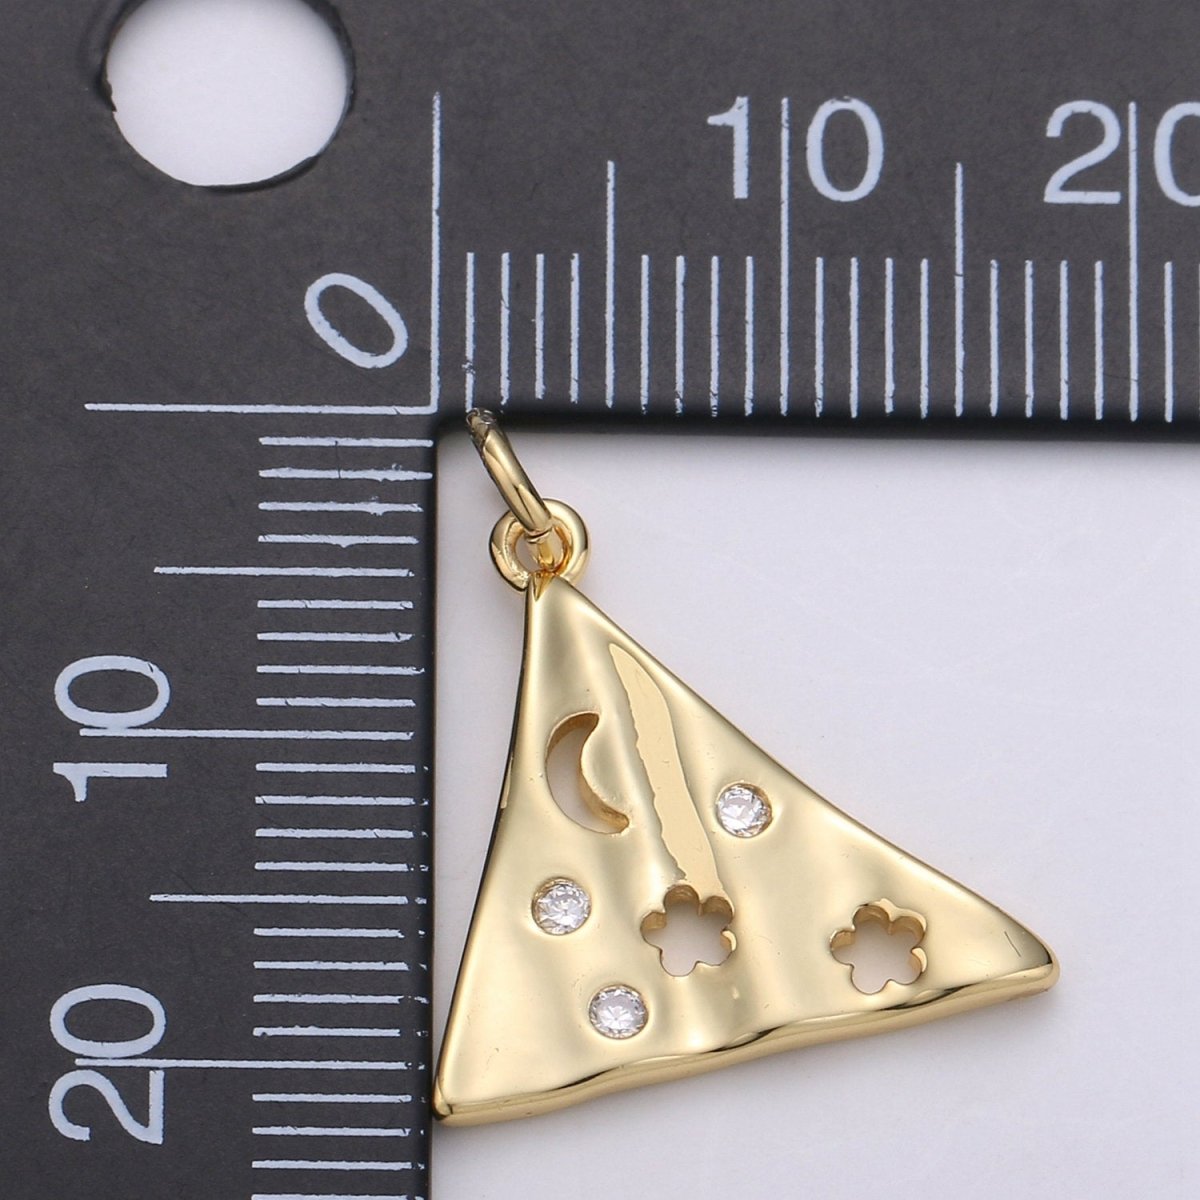 Dainty Triangle Charm Jewelry Gold Crescent Moon and star Charm Jewelry Making Supply 24K Gold Filled Findings Charm Star JewelryC-561 - DLUXCA